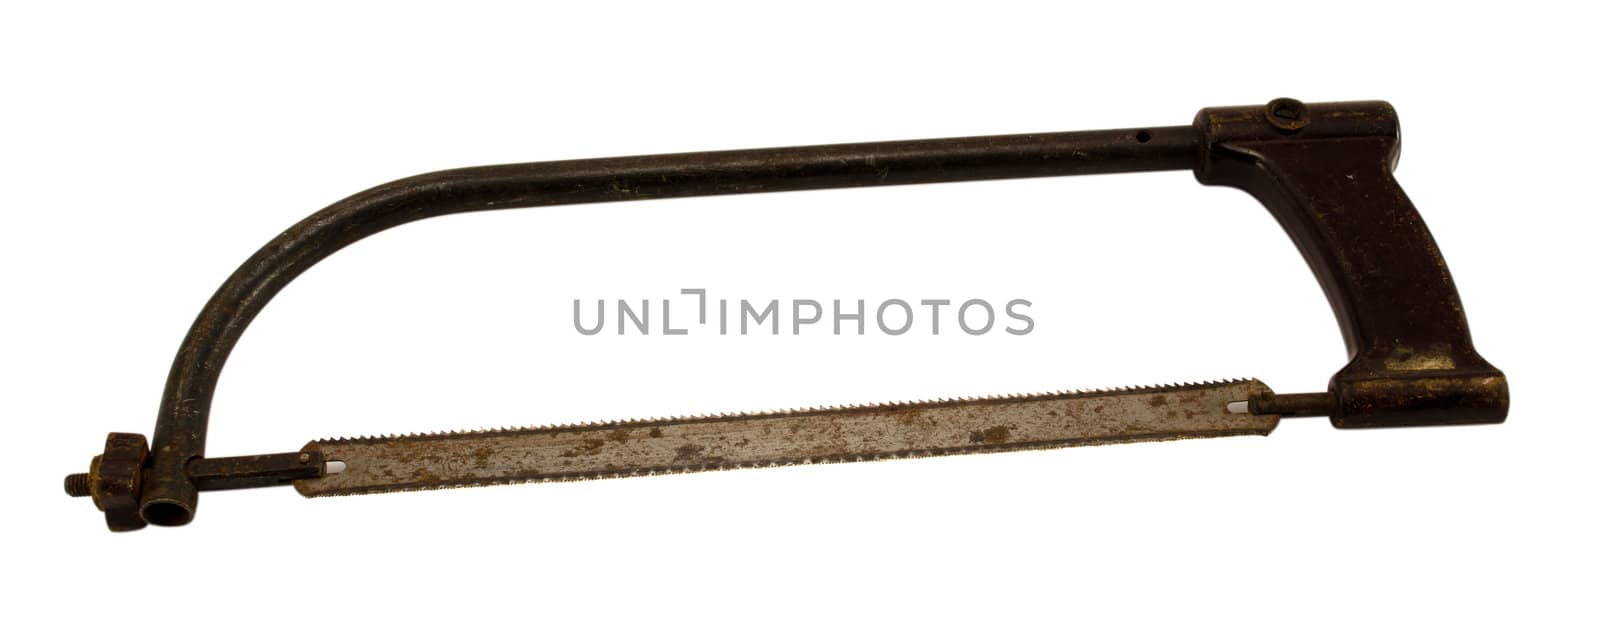 retro rusty hand hacksaw hack saw tool for metal cut isolated on white background